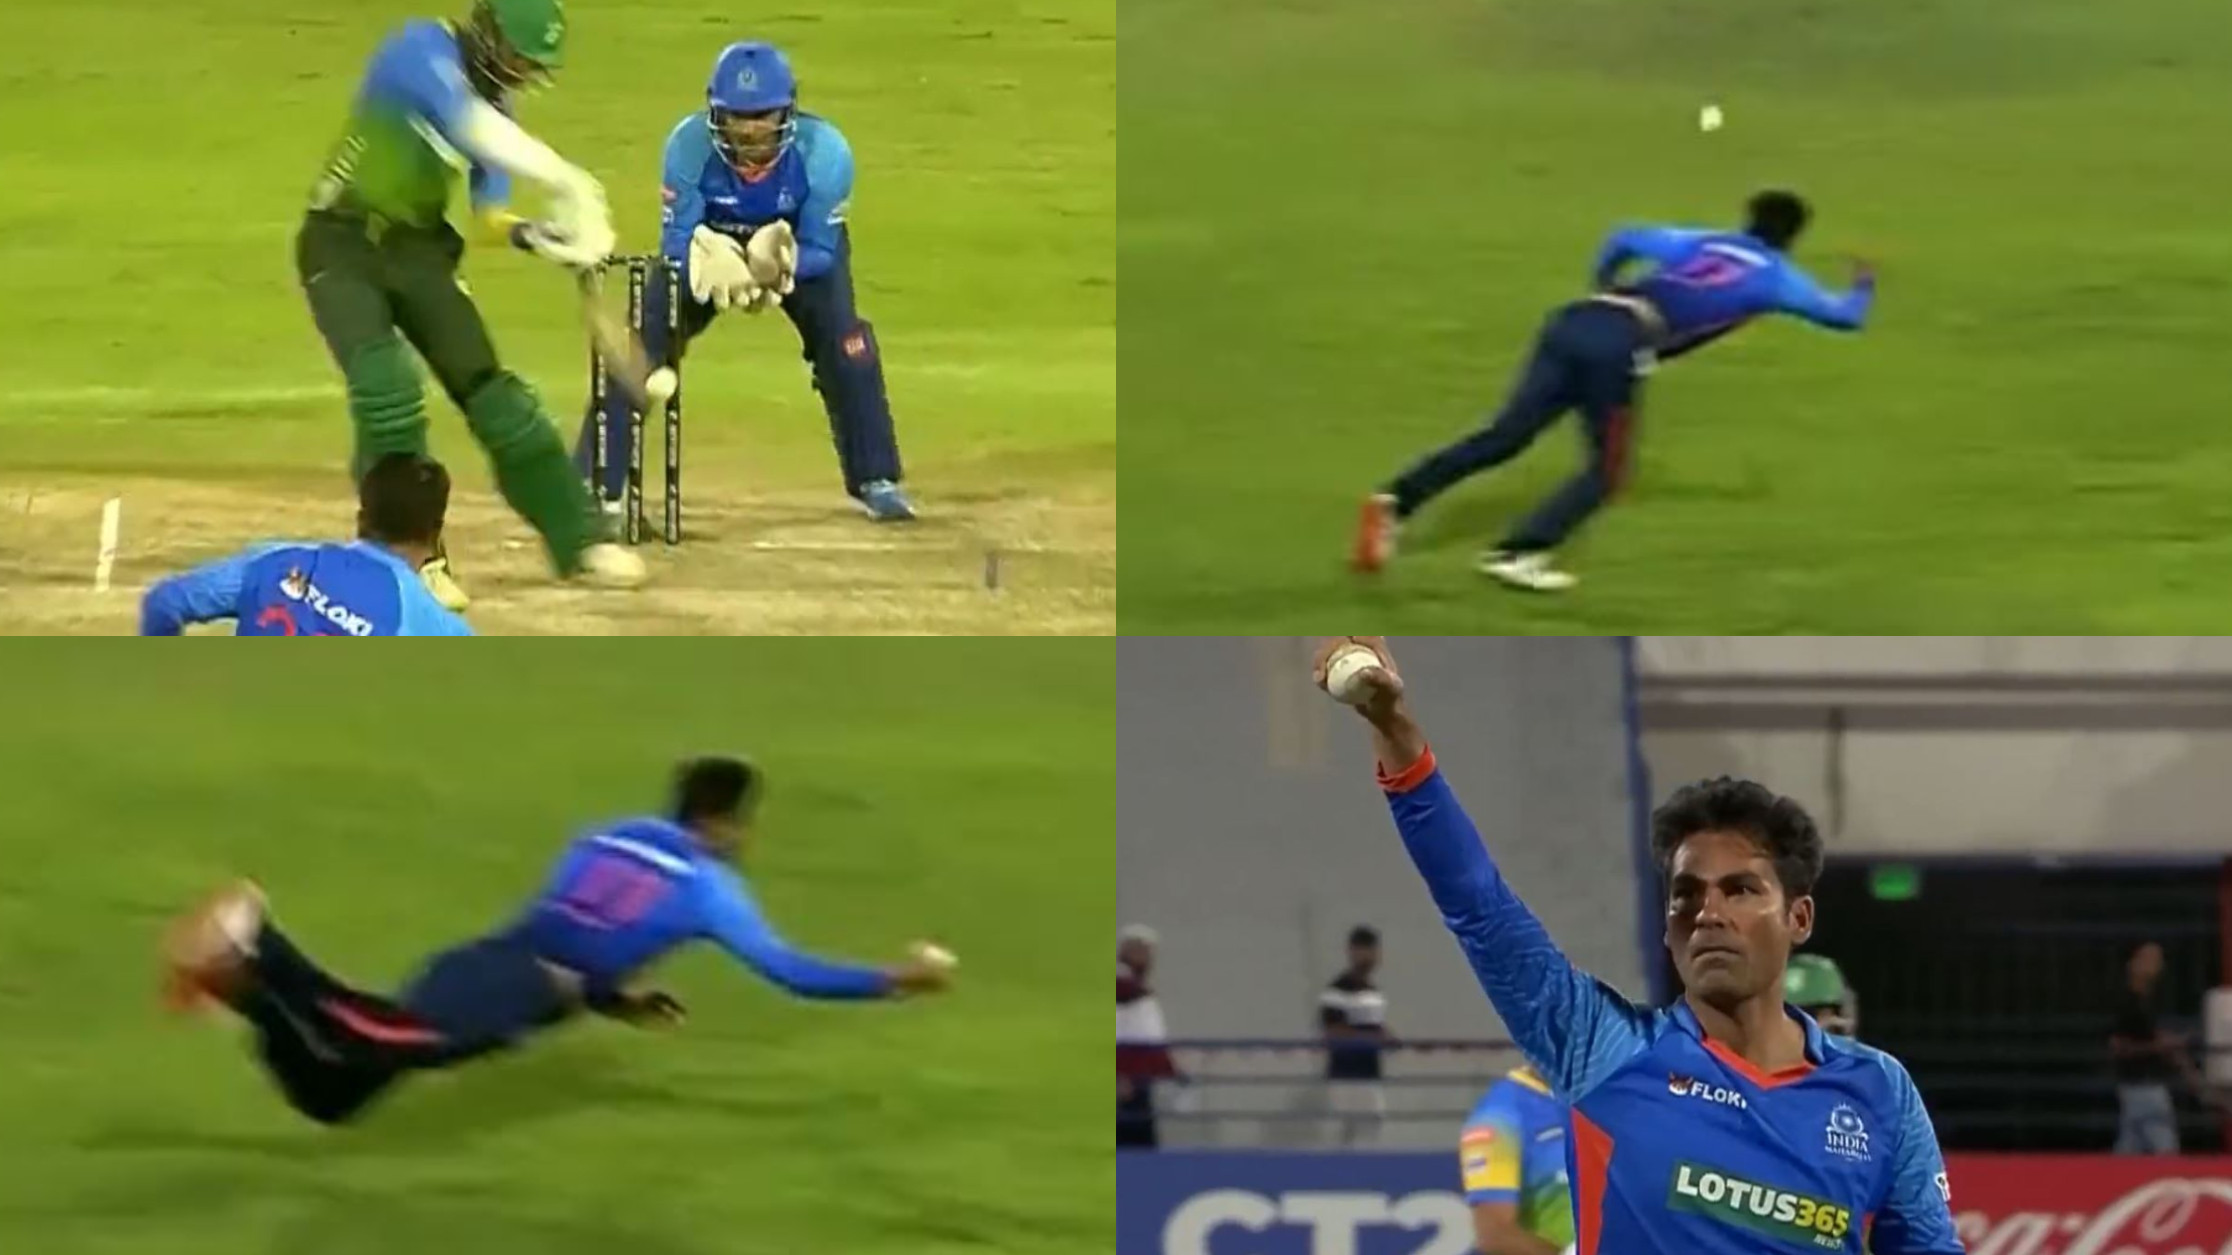 LLC 2023: WATCH- Mohammad Kaif turns back the clock; takes a one-handed diving beauty of a catch